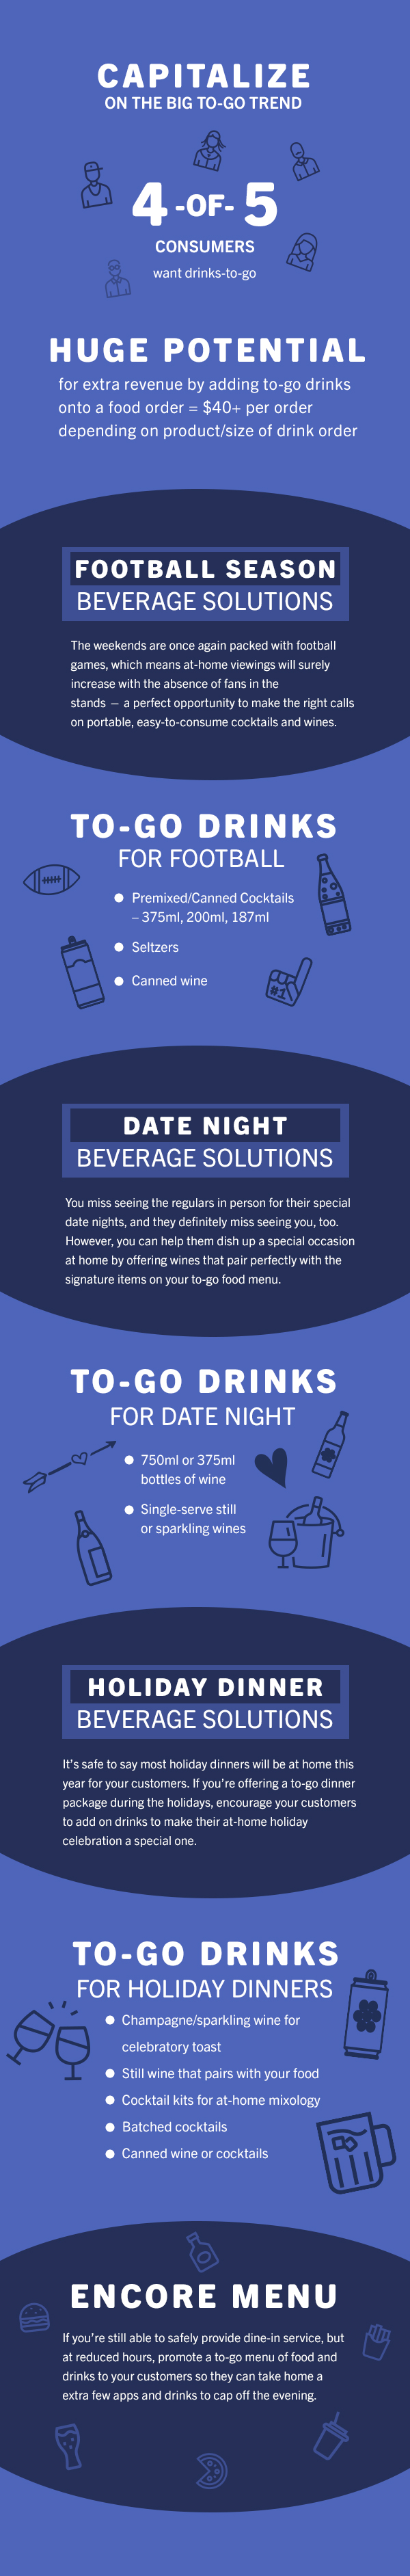 To-go drink solutions for winter infographic 